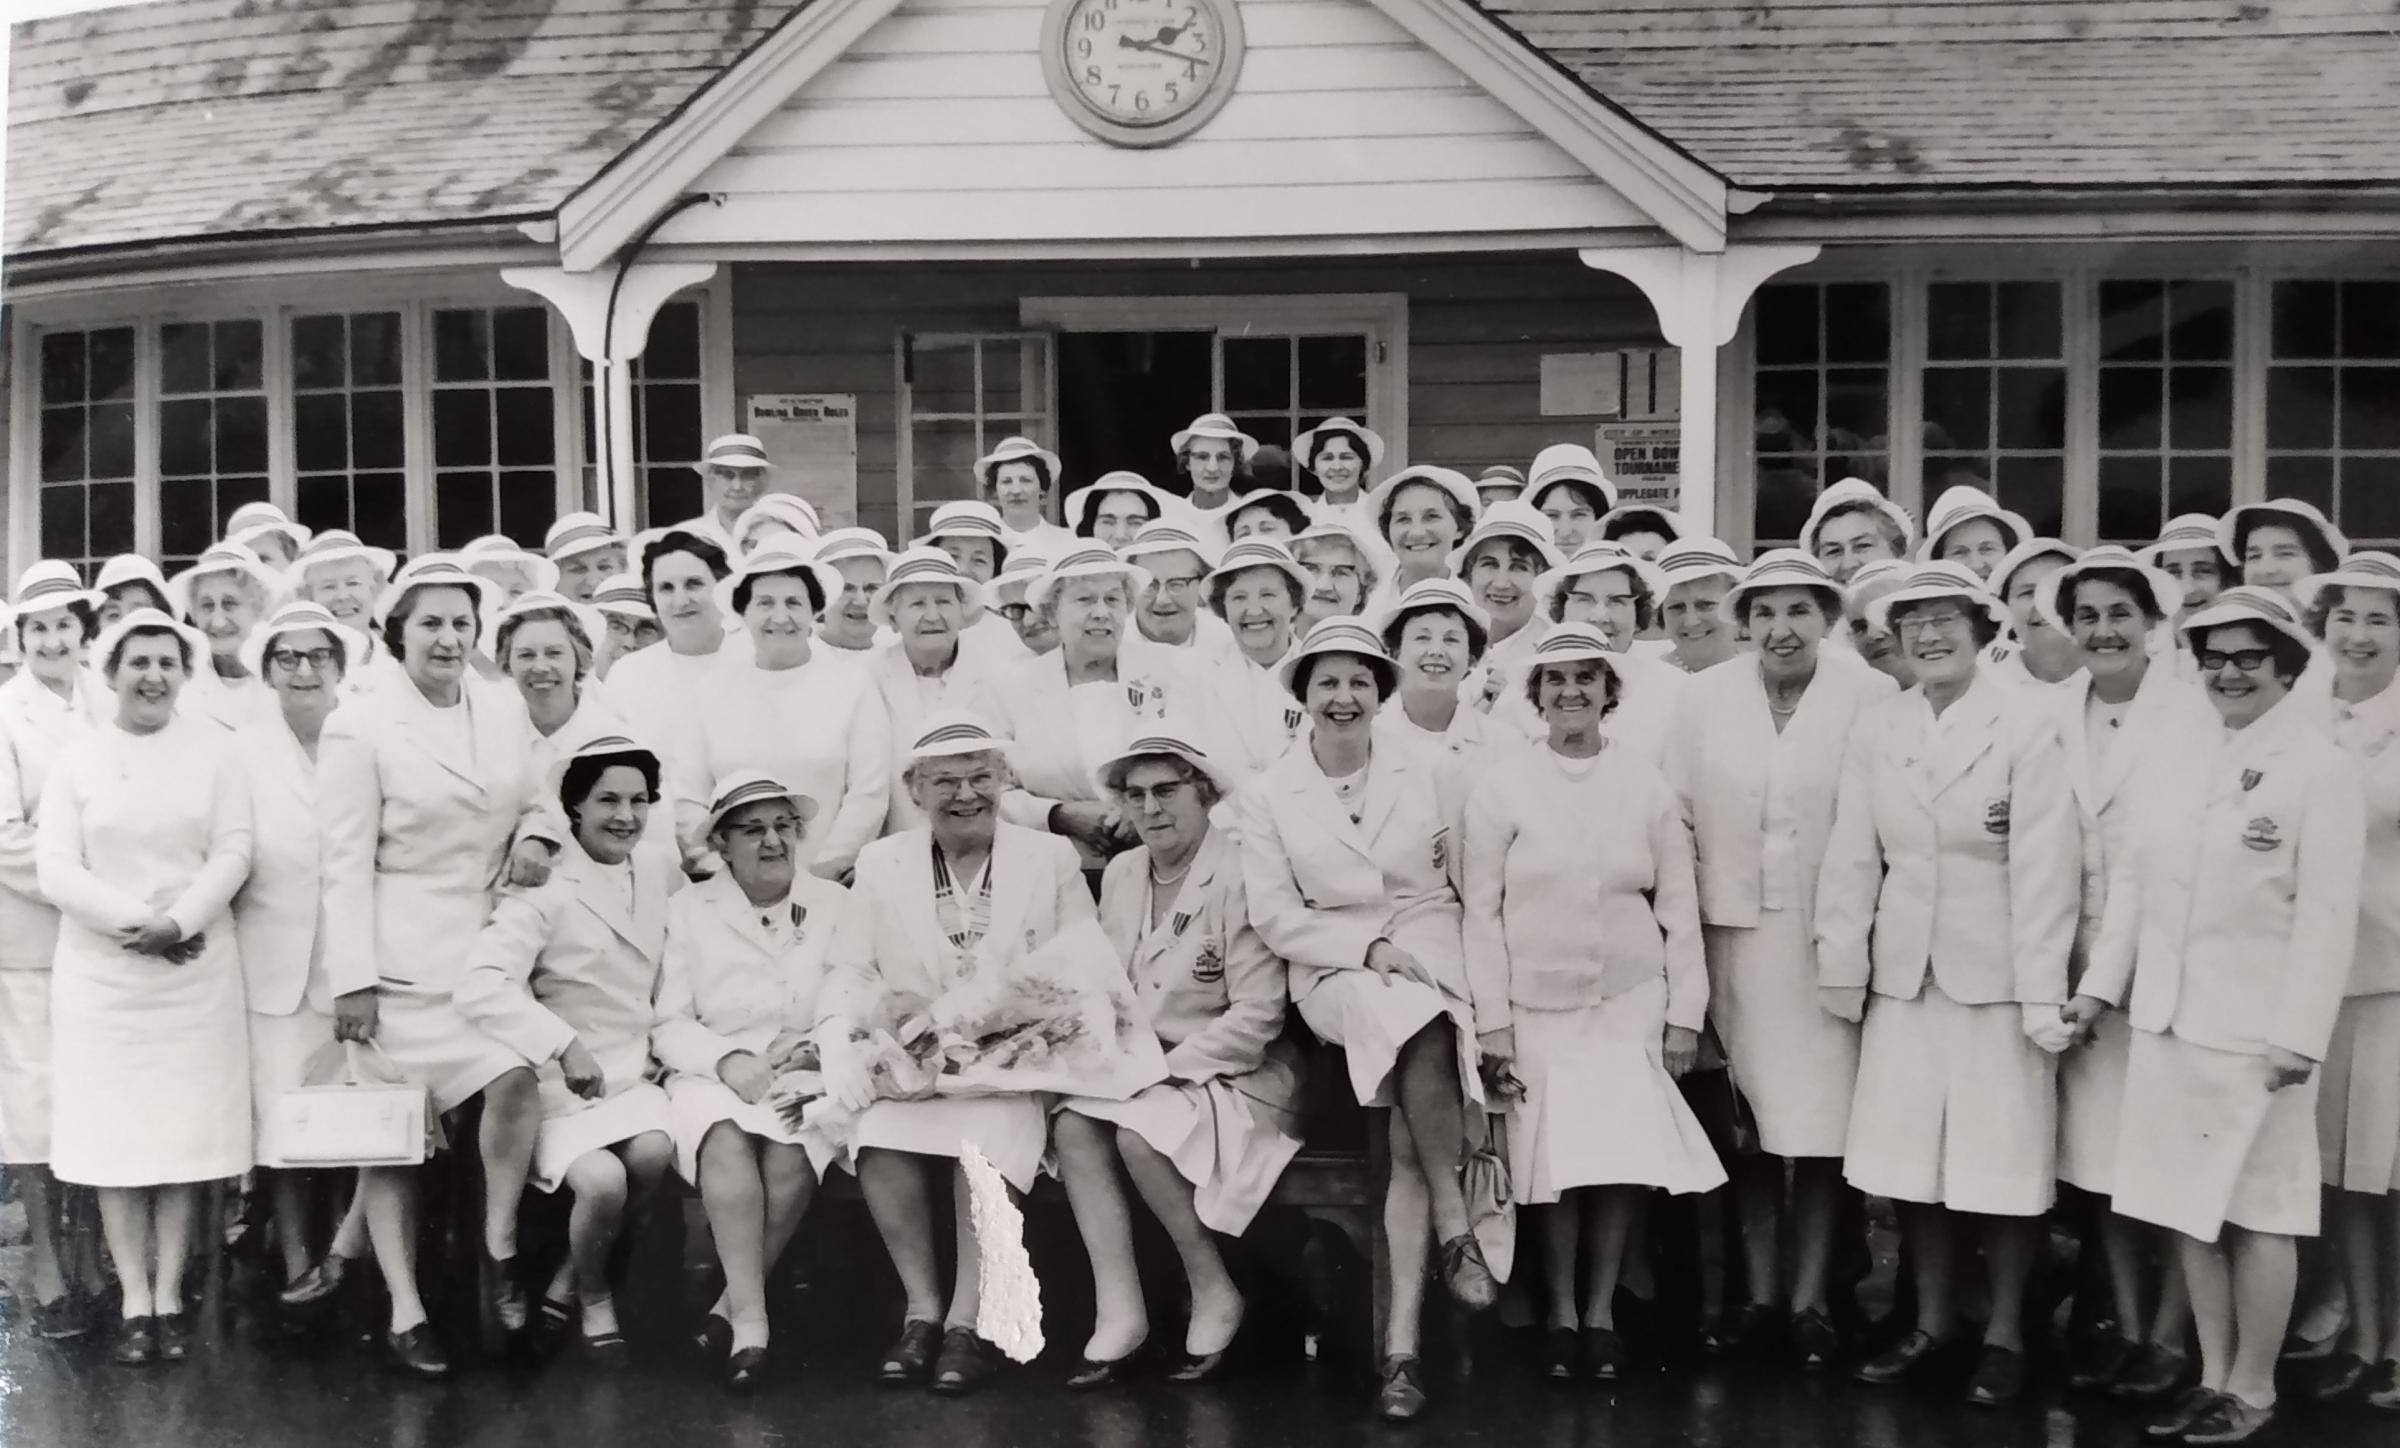 All the way back to May 1966 for this picture of the Worcestershire County Women’s Bowls president’s day